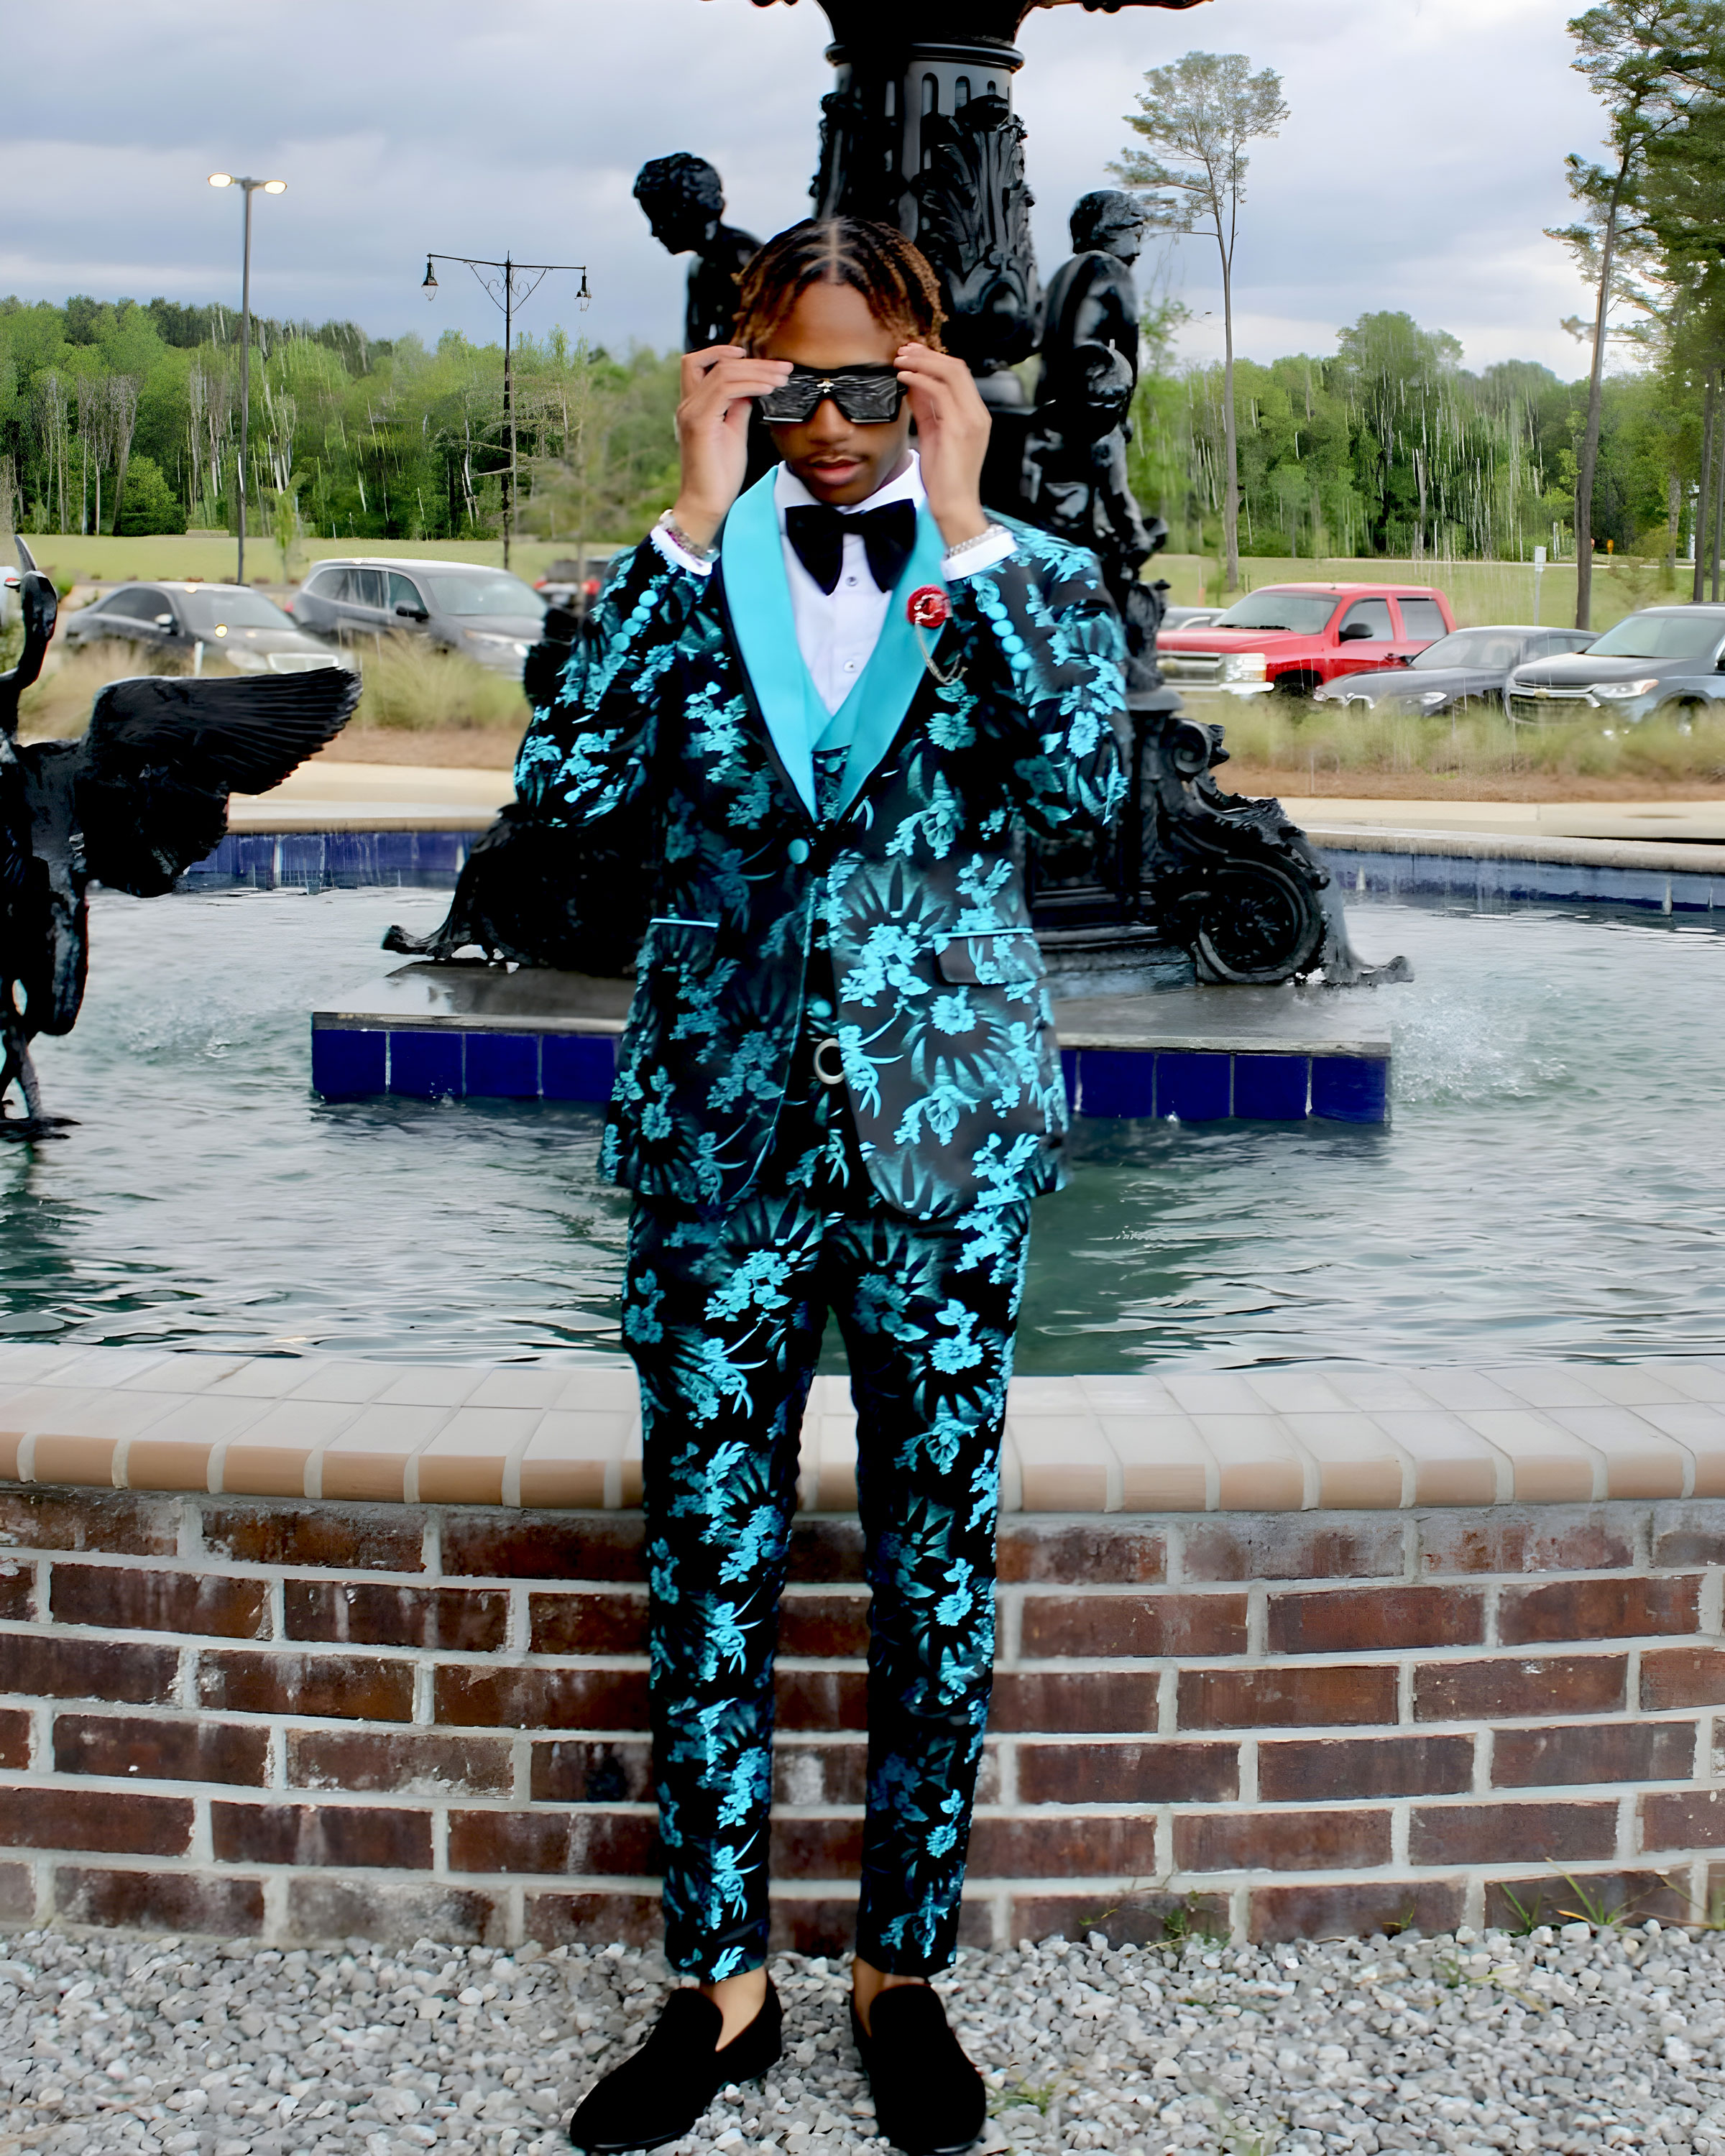 Black-and-Turquoise-Groom-Wedding-Suit-Prom-Suit-For-Guys-Tuxedo-For-Men-Customer-Gallery-from-Gentlemansgturu.com